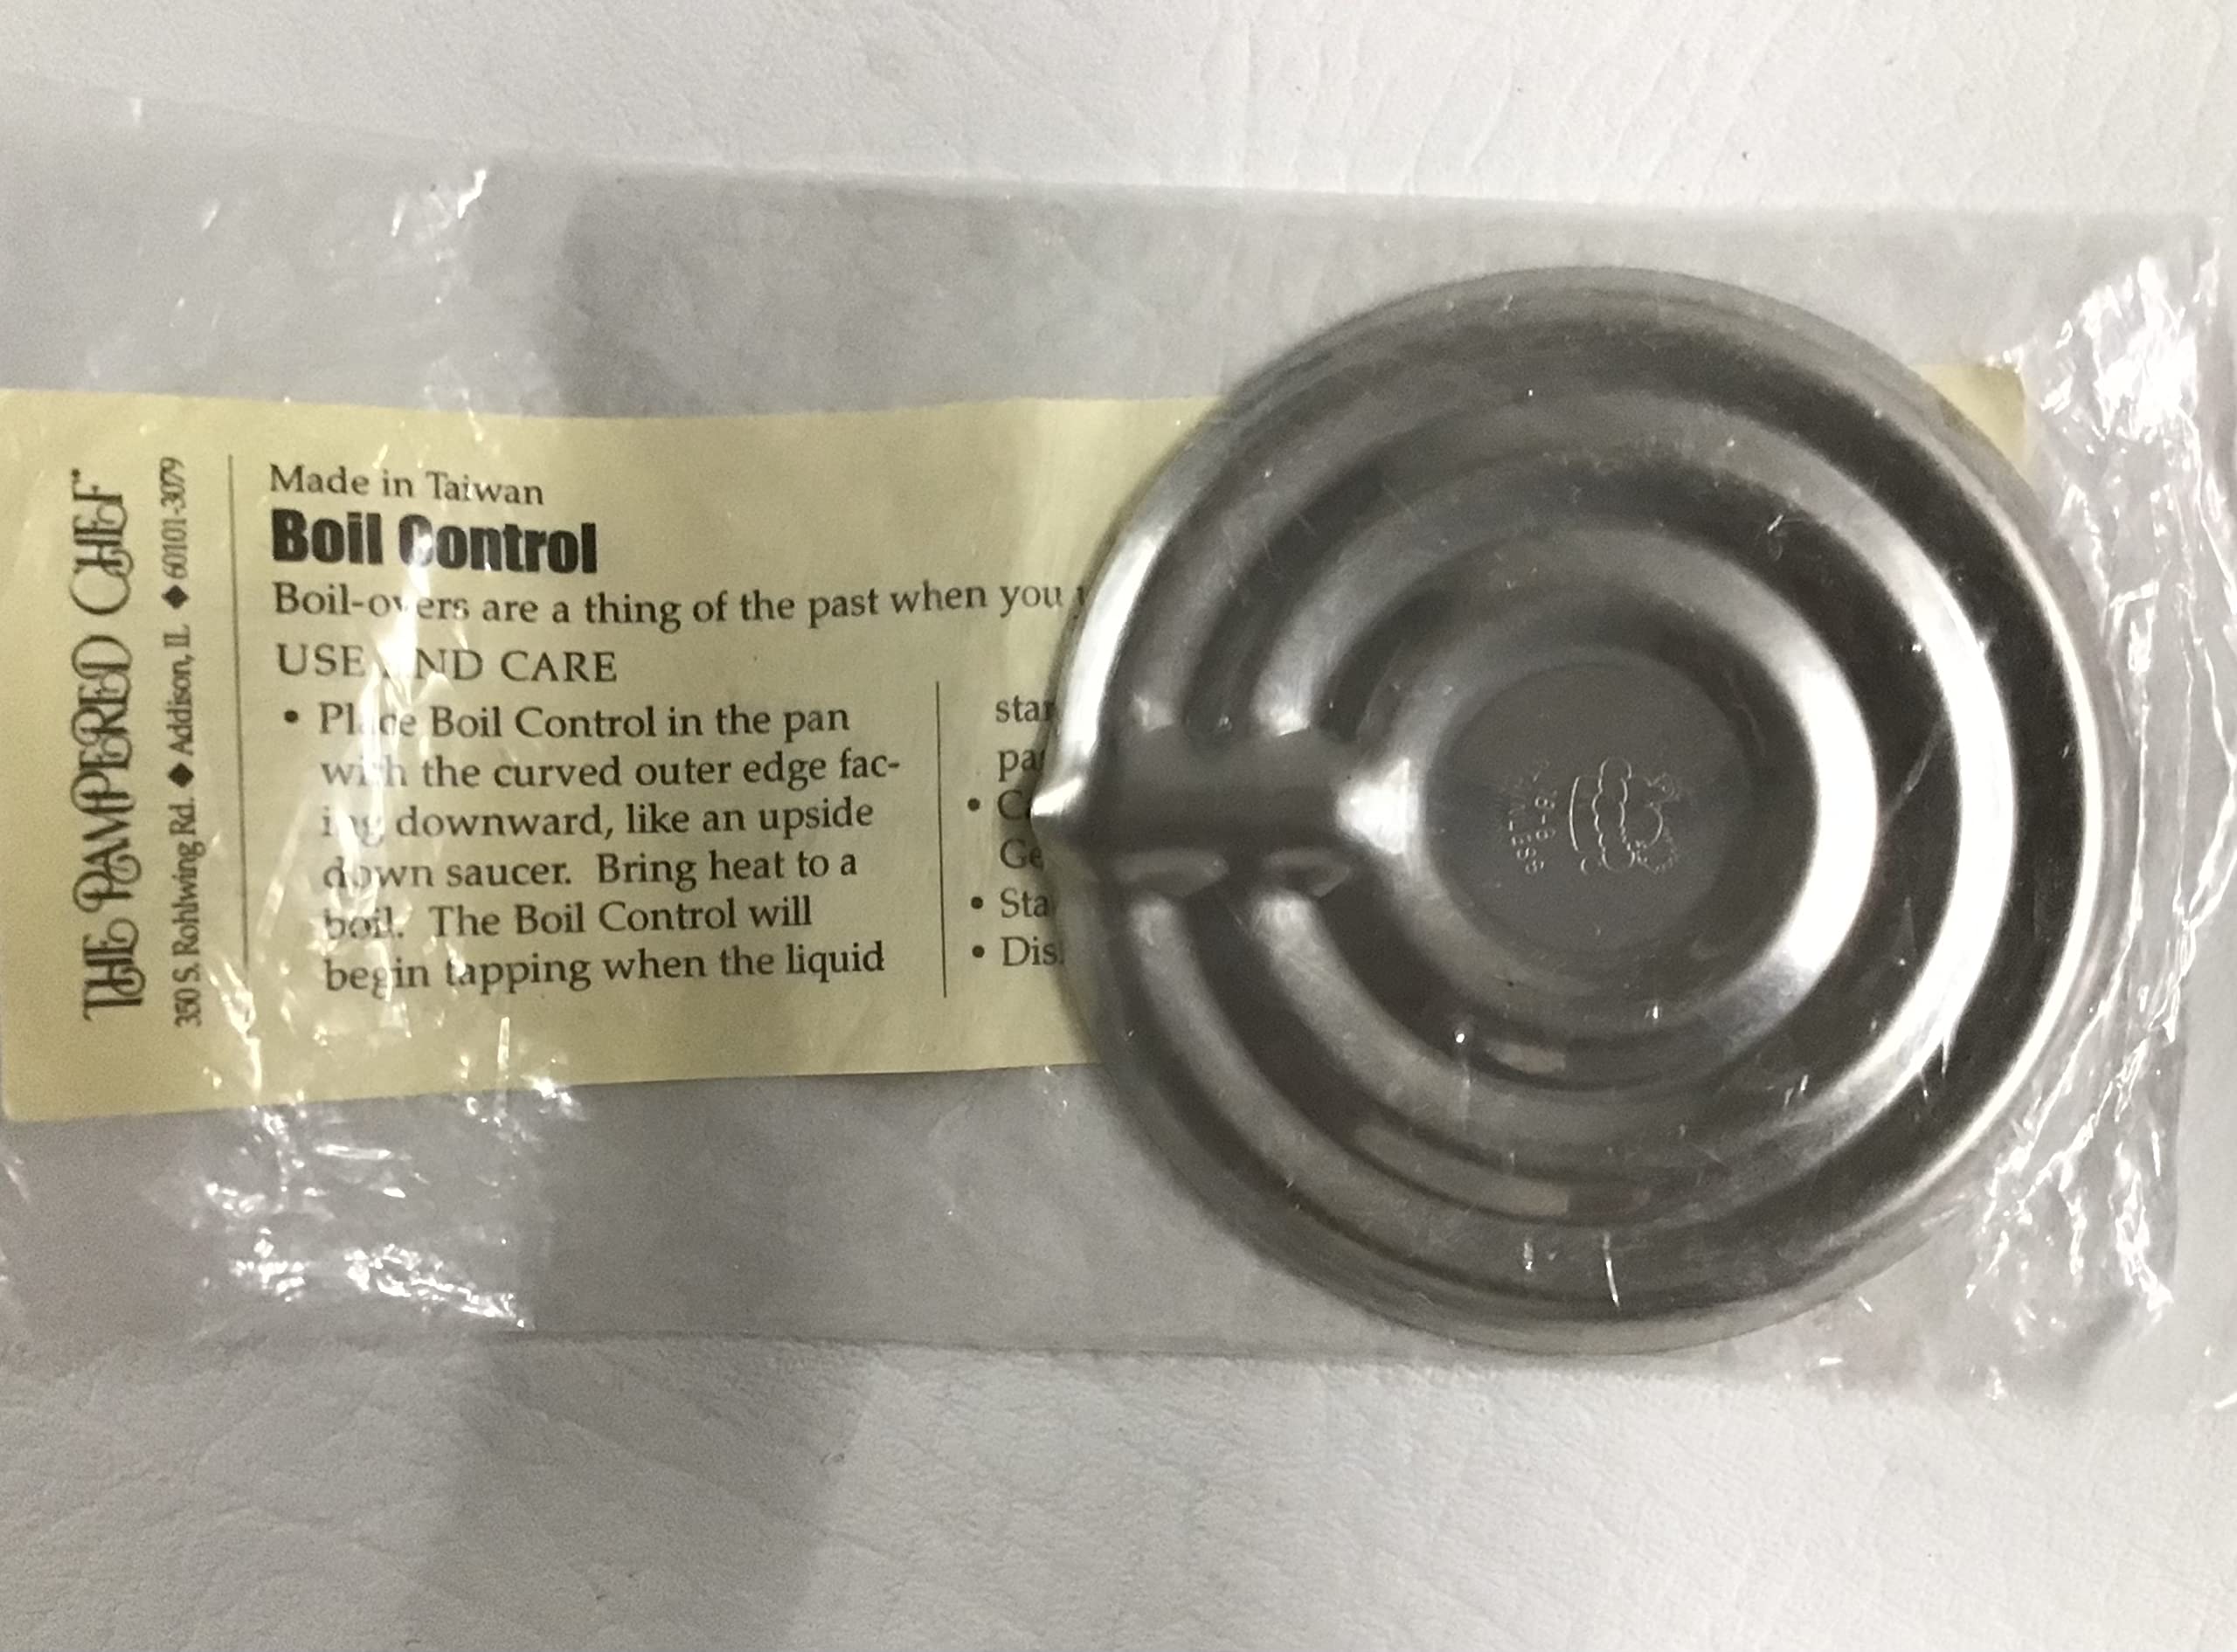 The Pampered Chef Stainless Steel Boil Control #2520